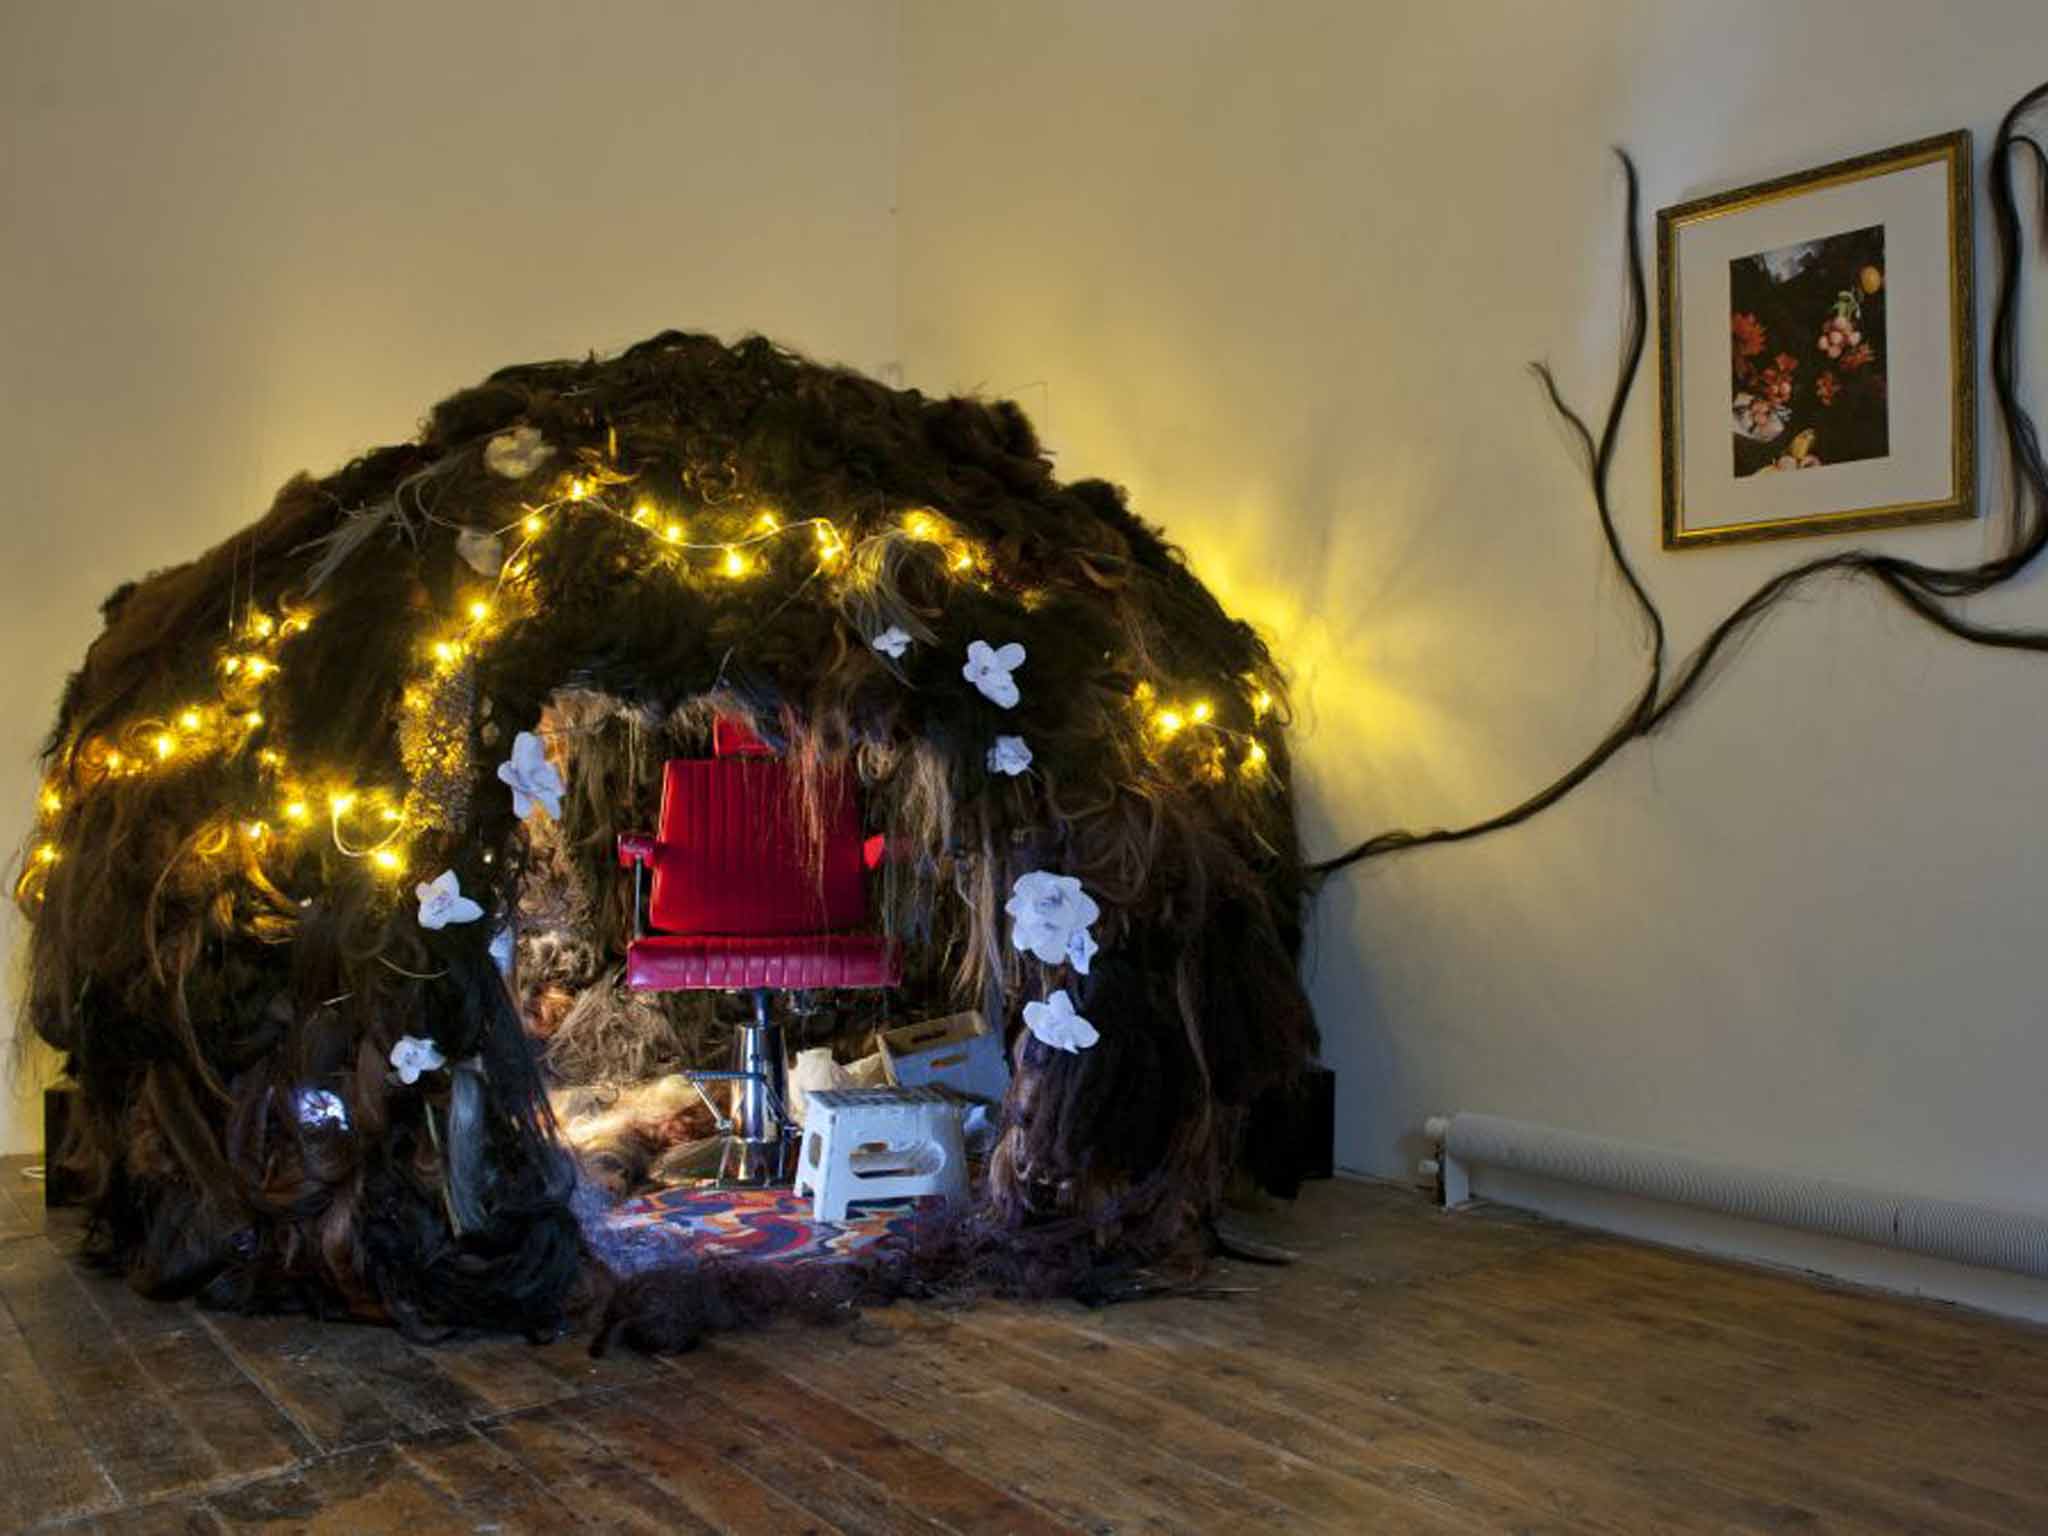 The seven-foot 'tumbleweave', made from hair extensions, that forms the centrepiece of 'Dark & Lovely'